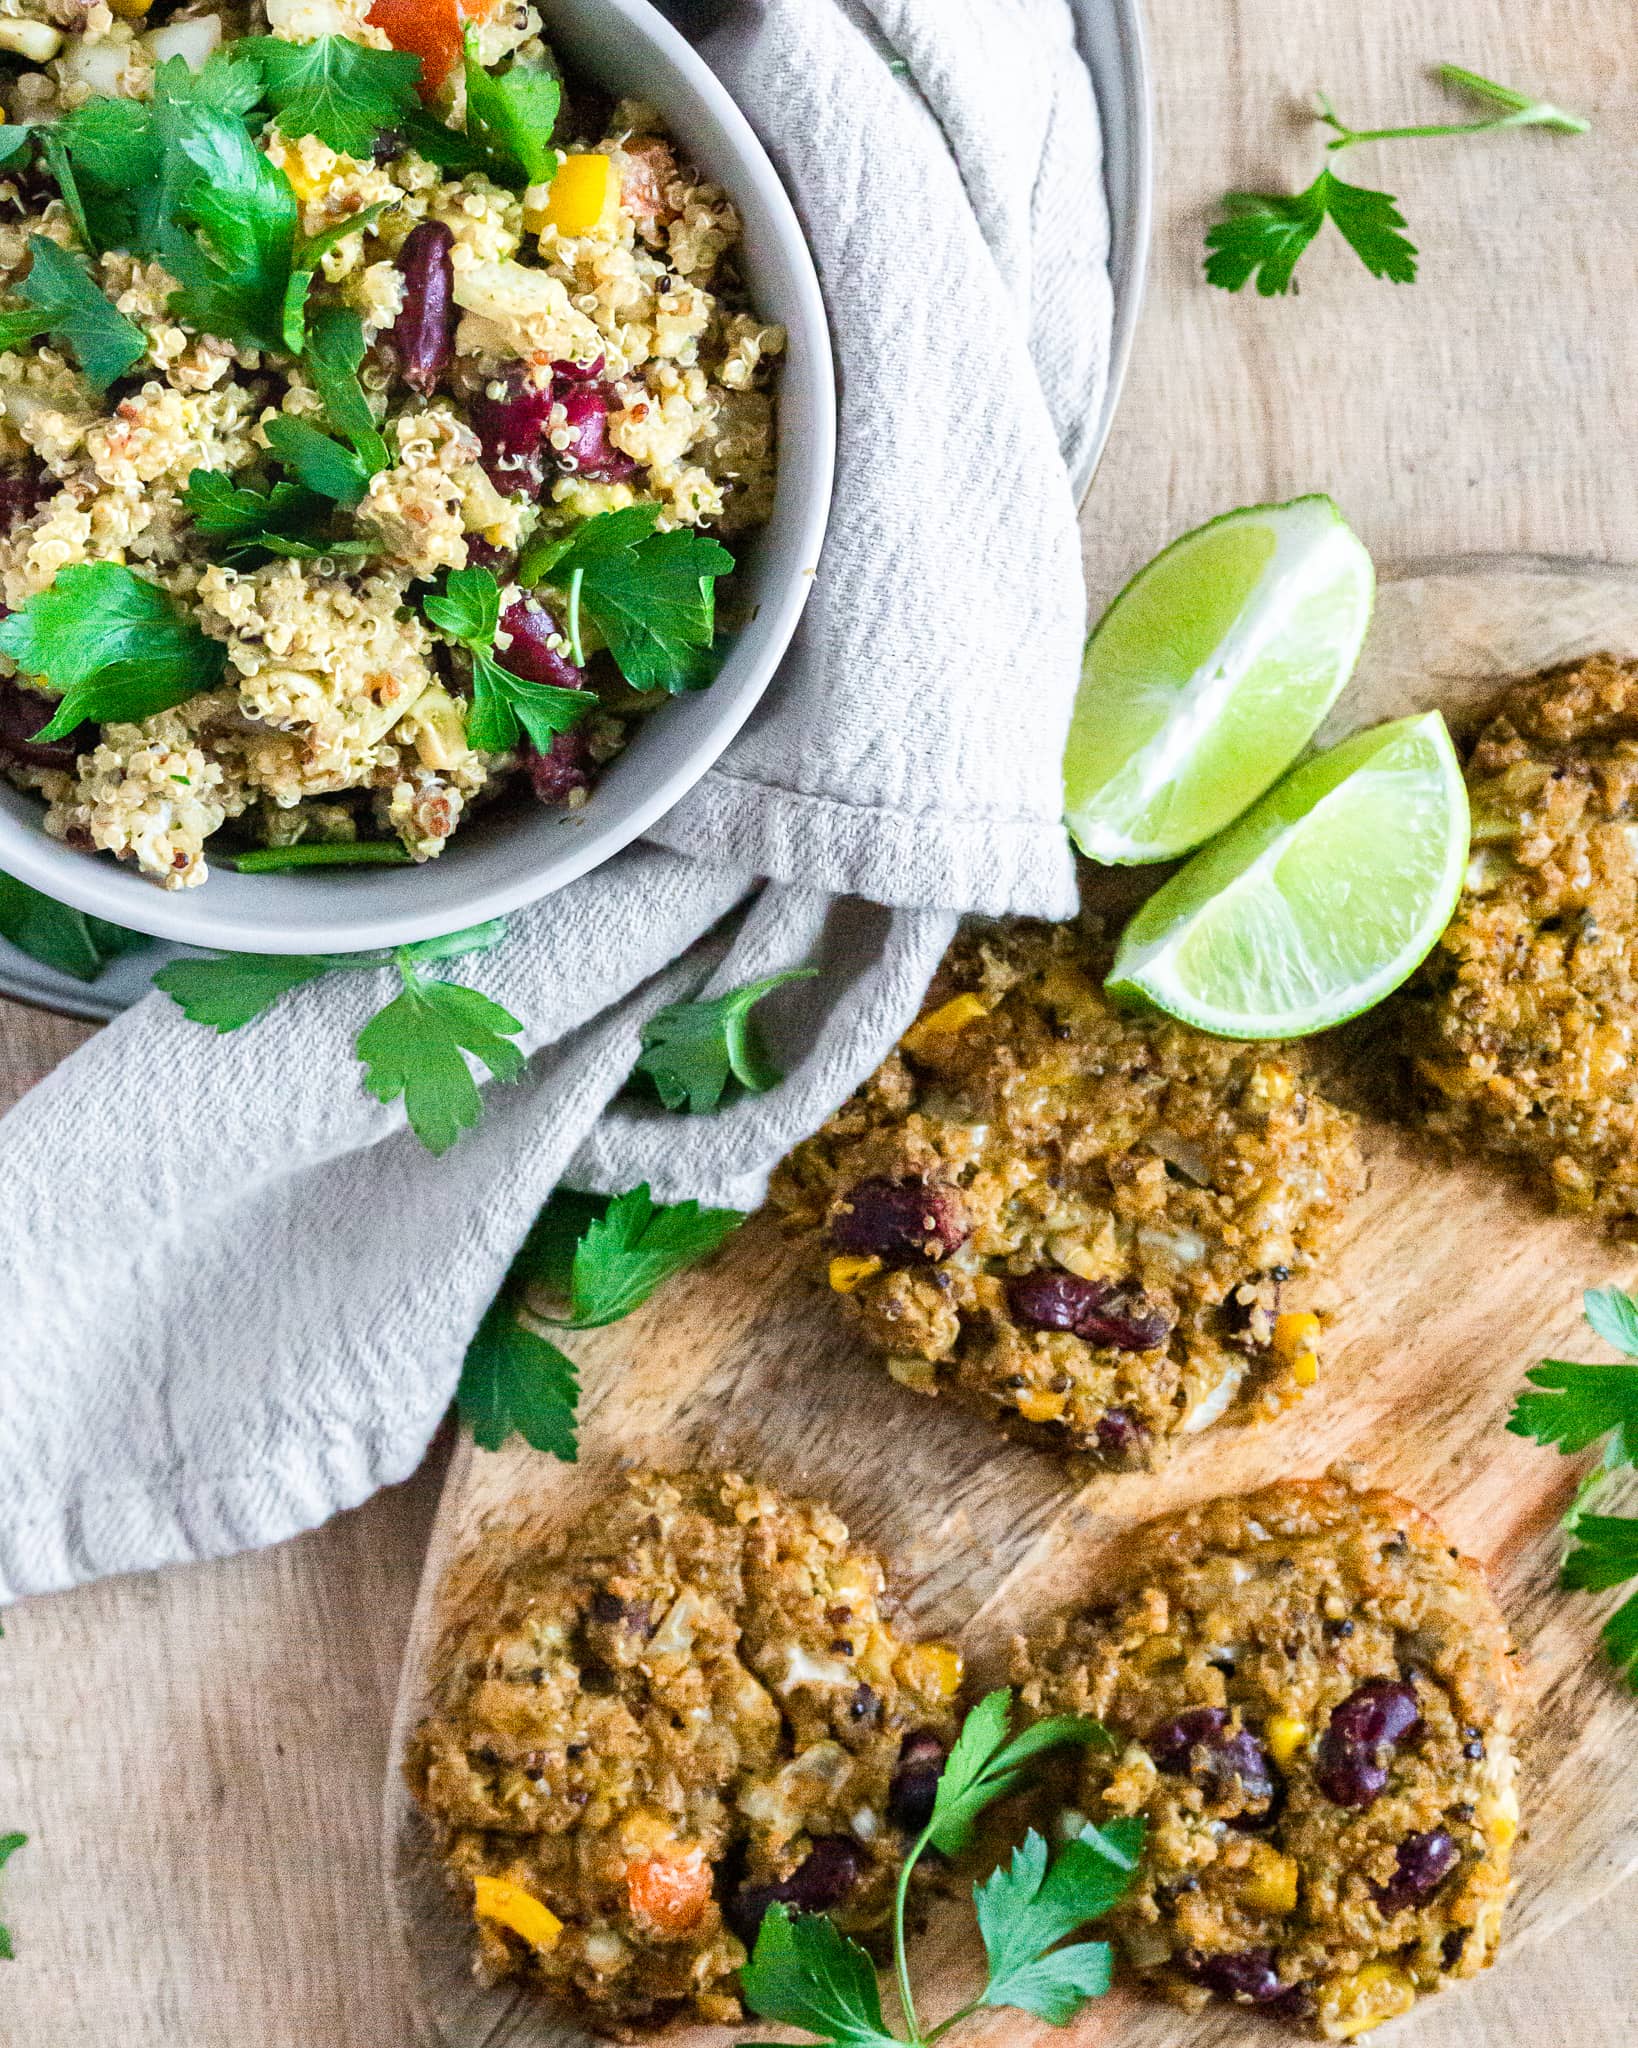 2 in 1- No Waste Mexican-Inspired Quinoa Salad